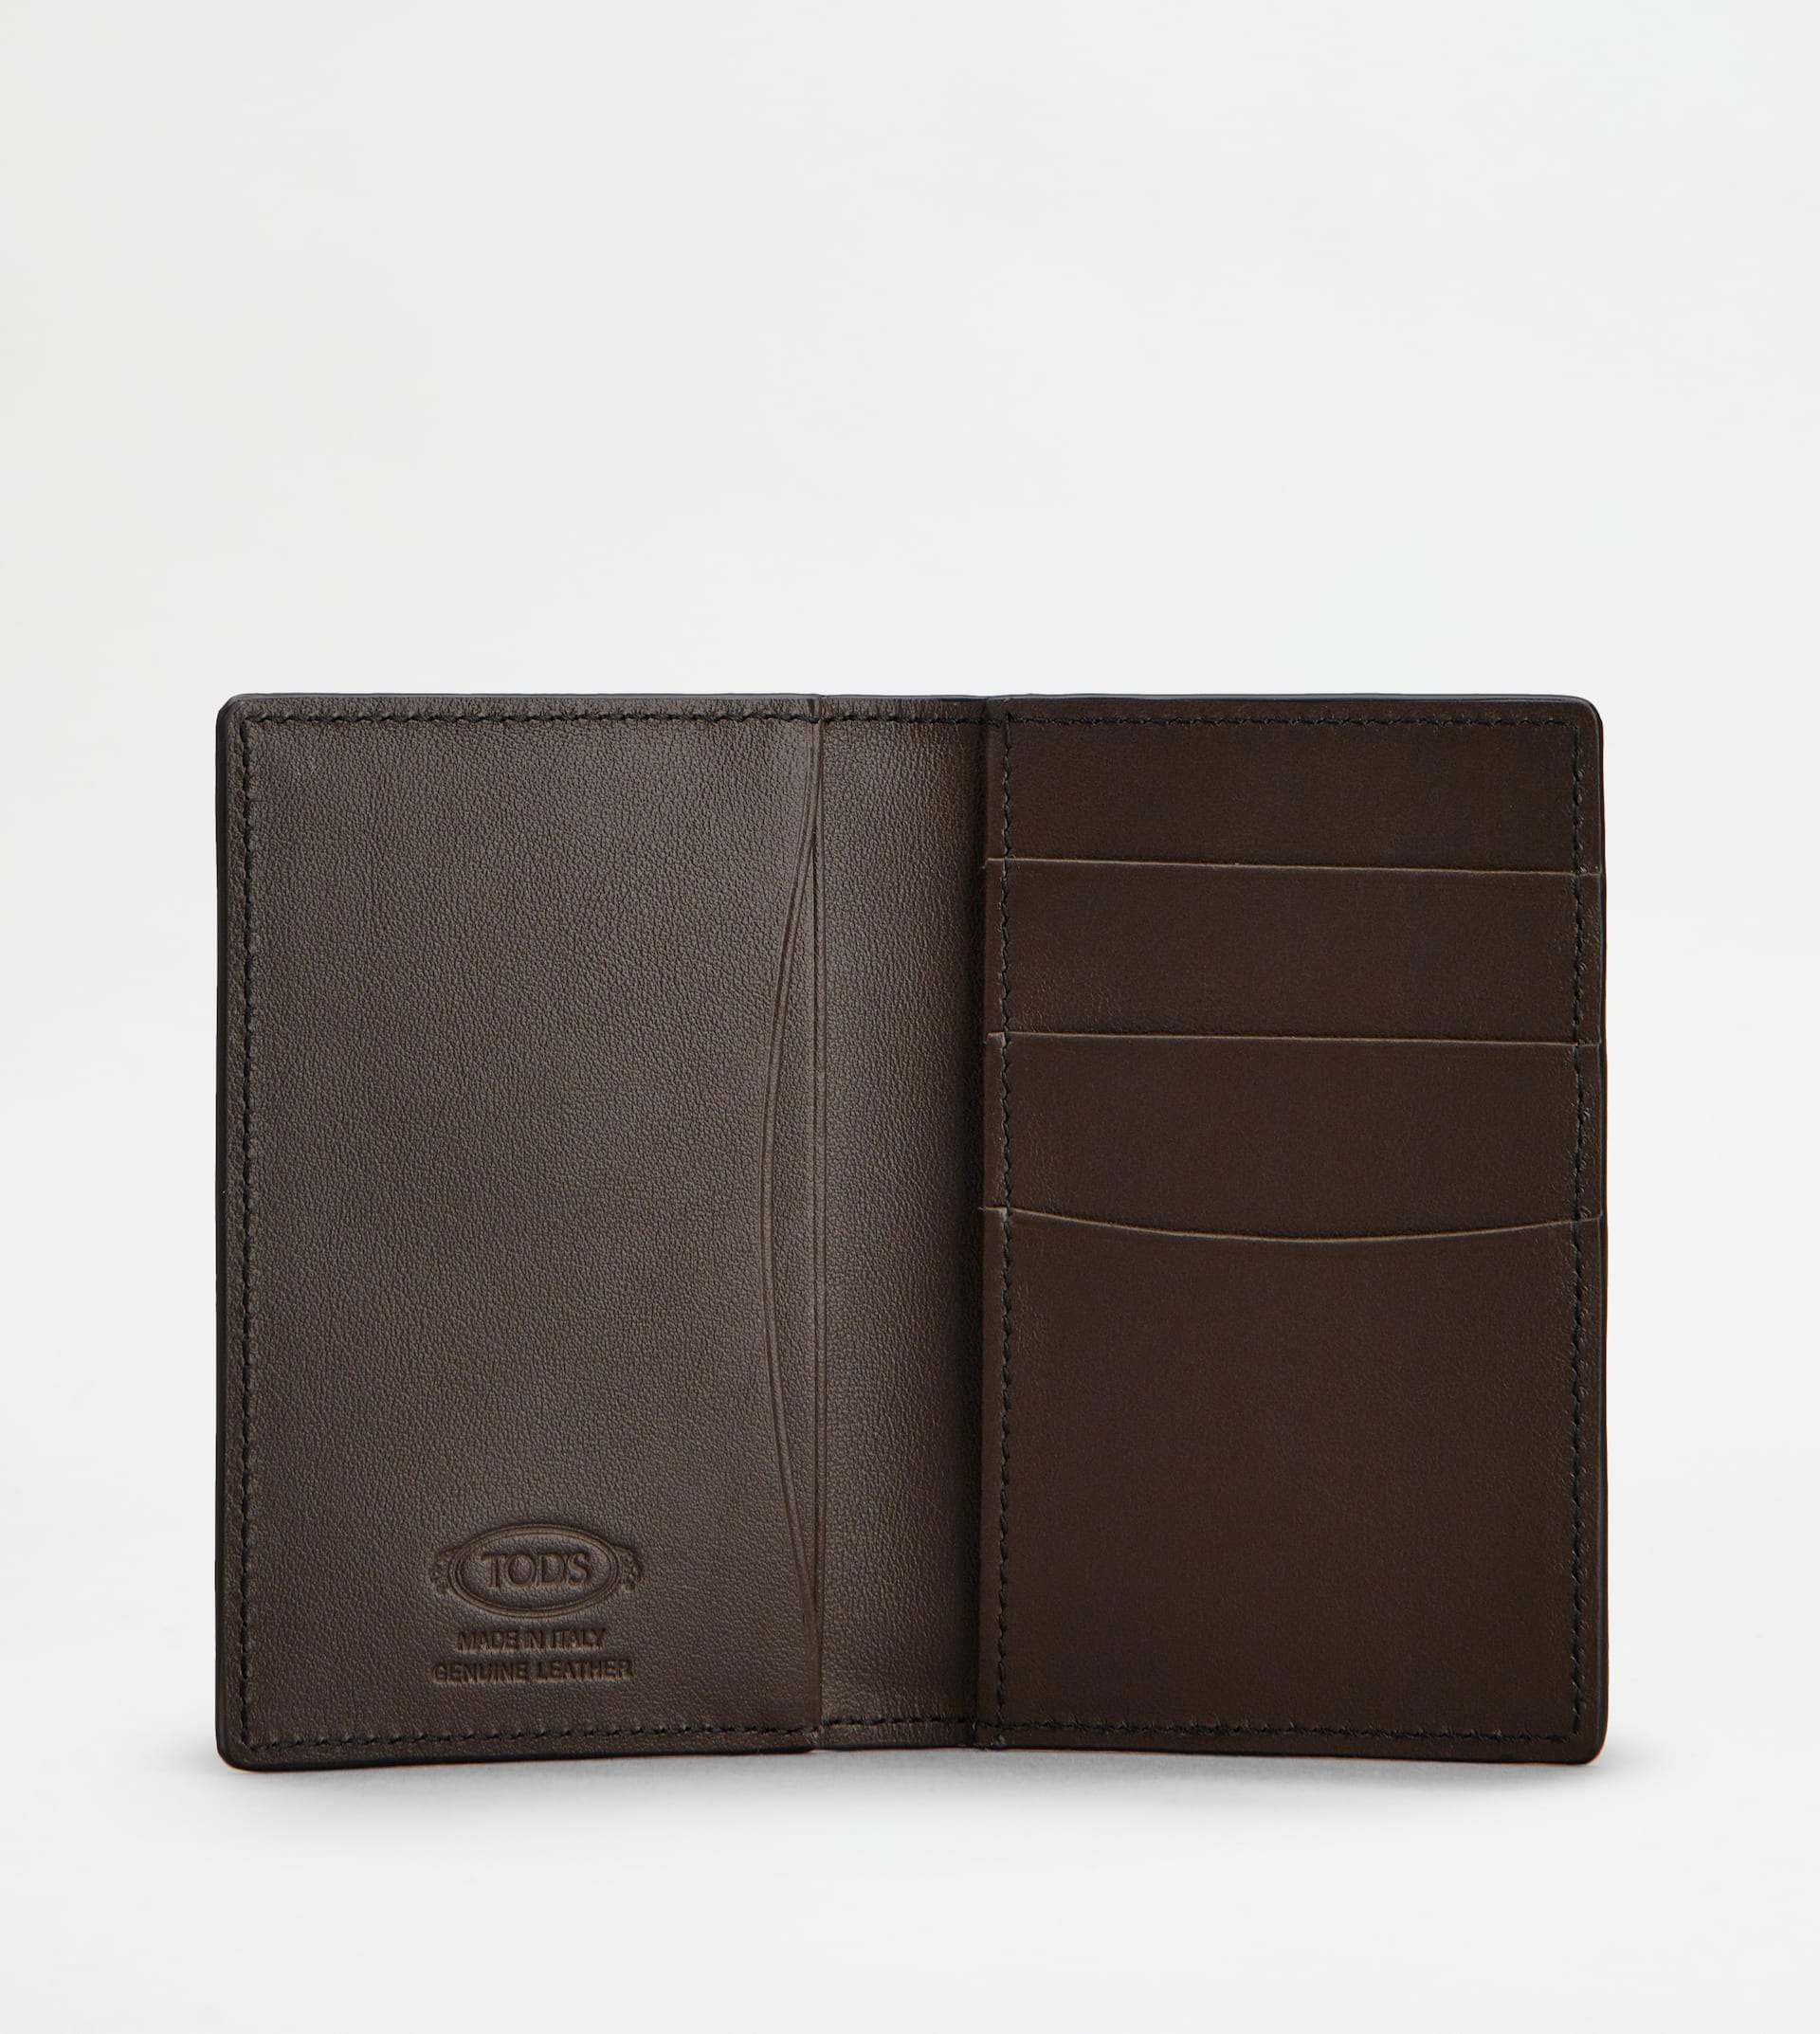 CARD HOLDER IN LEATHER - BROWN - 2